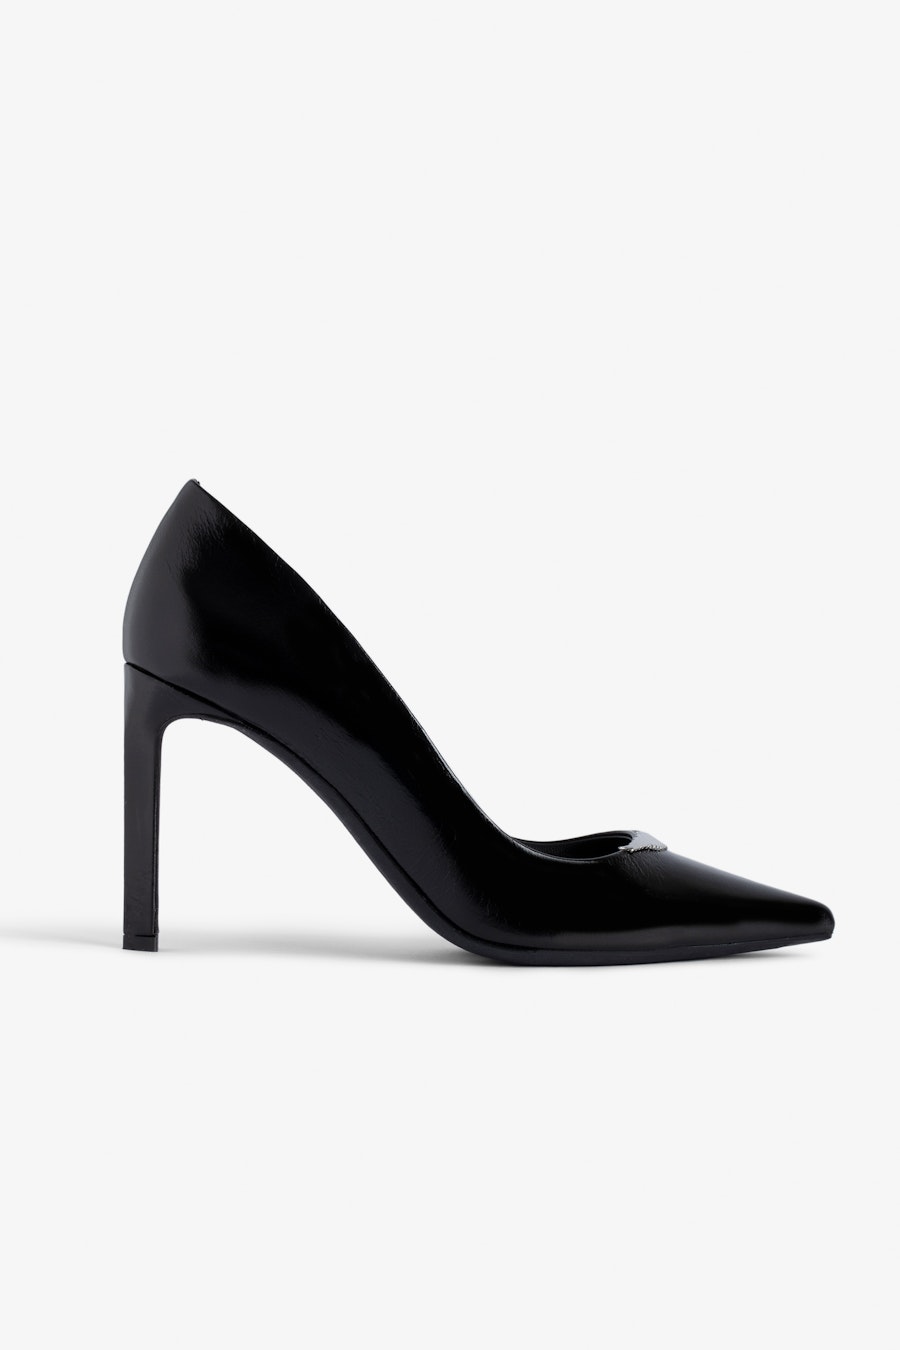 ZADIG&VOLTAIRE Perfect Court Shoes